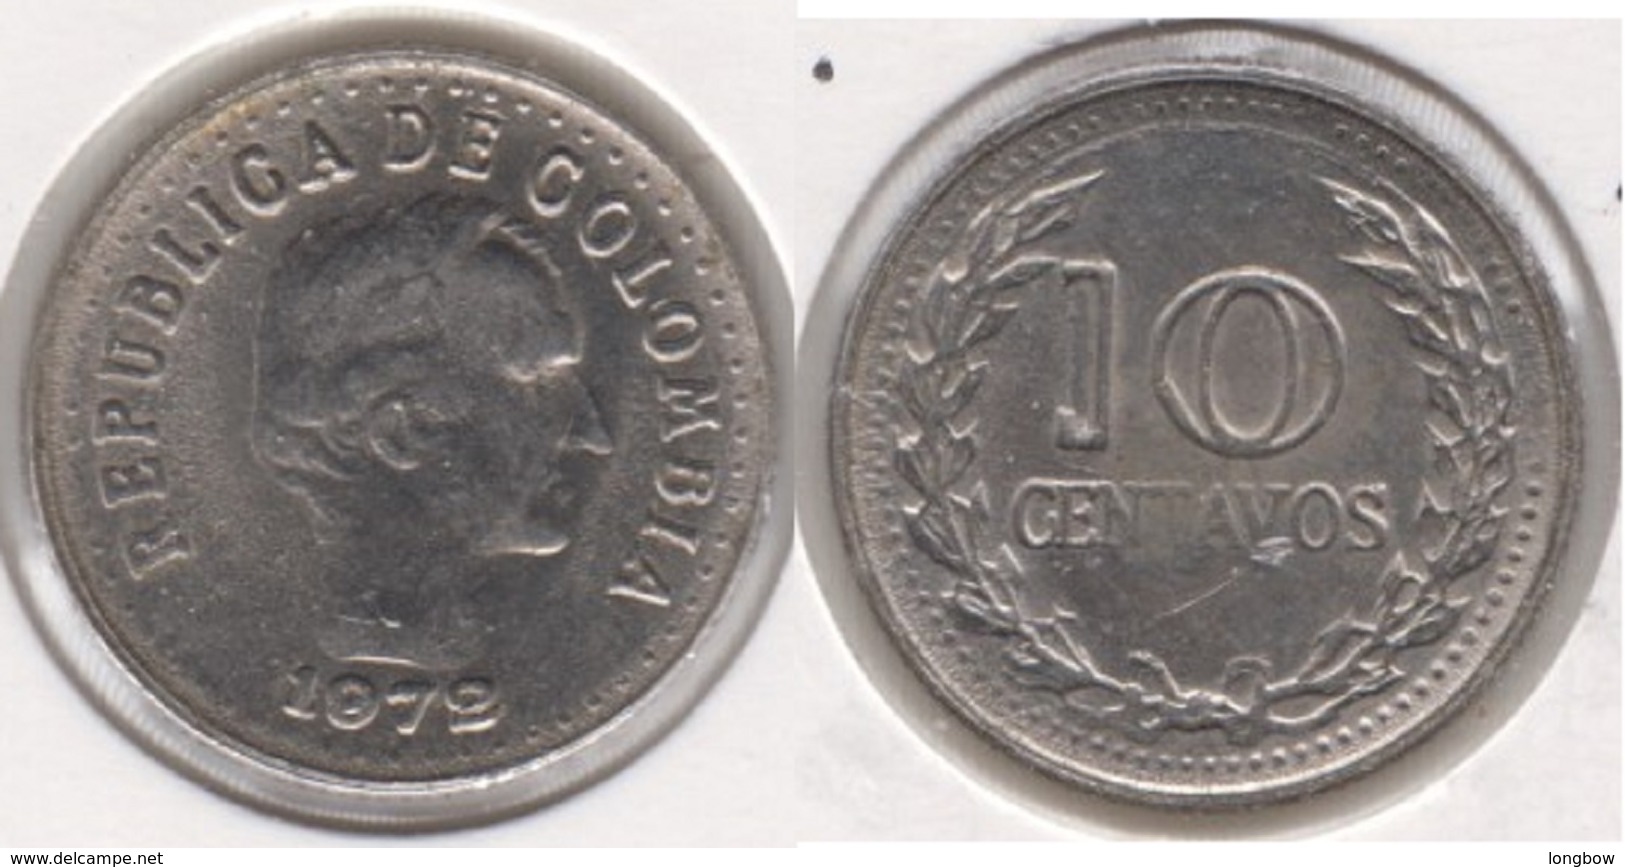 Colombia 10 Centavos 1972 KM#253 - Used - Colombia